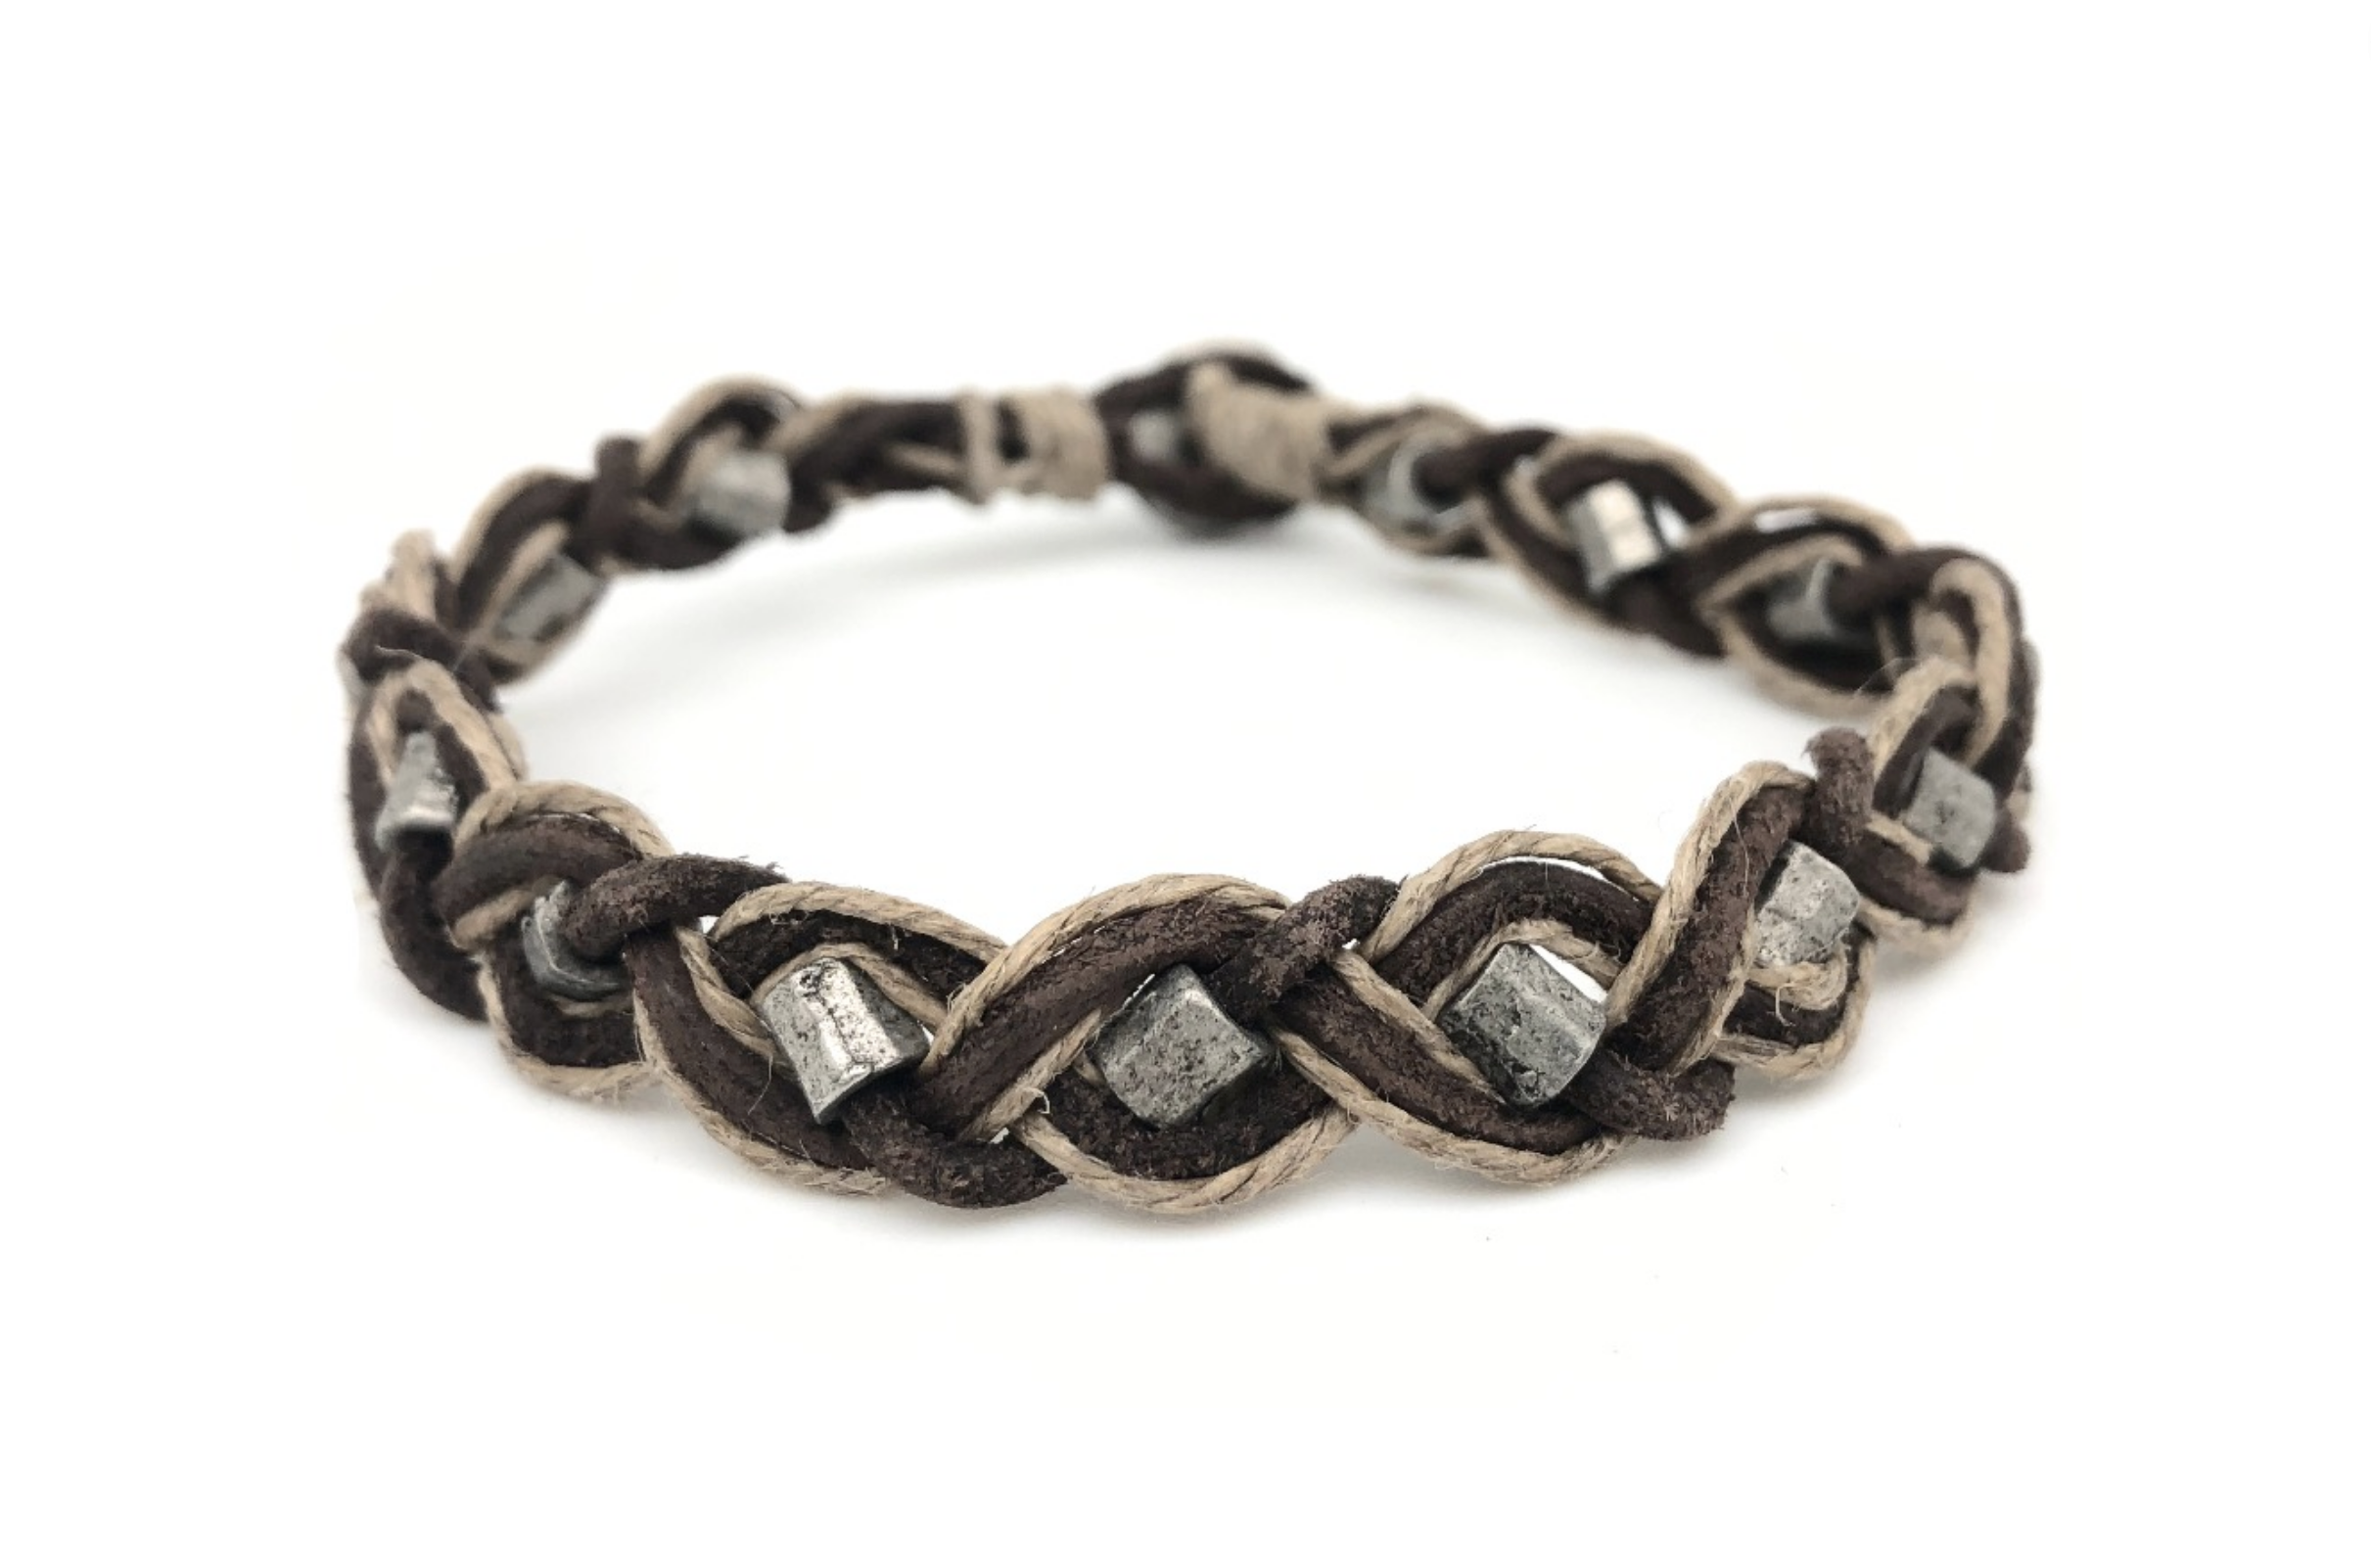 Aadi Beads Braided Into Leather and Jute Men's Bracelet